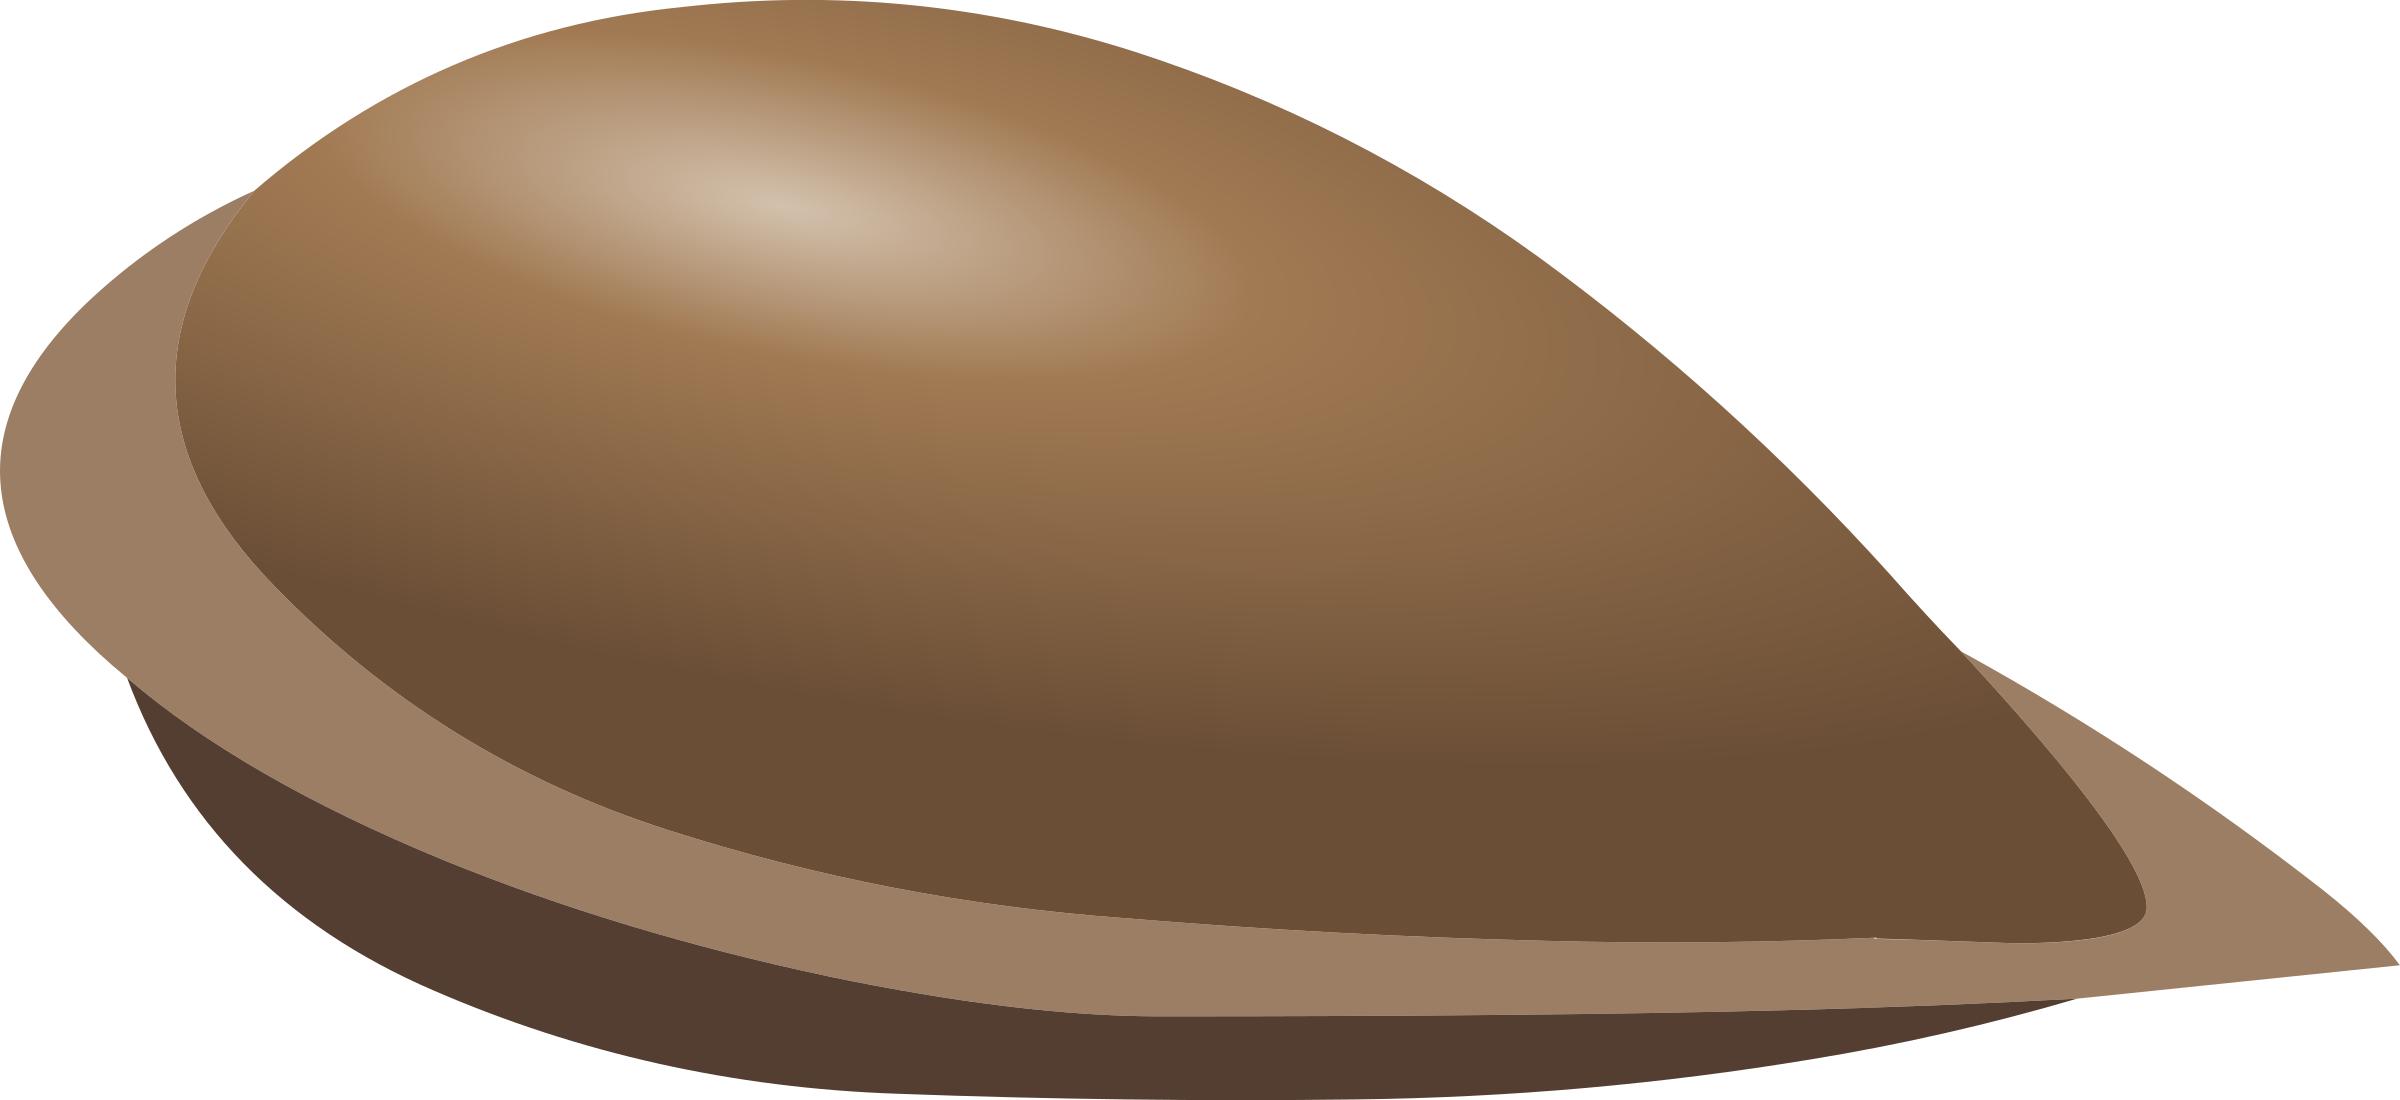 Misc Apple Seed png